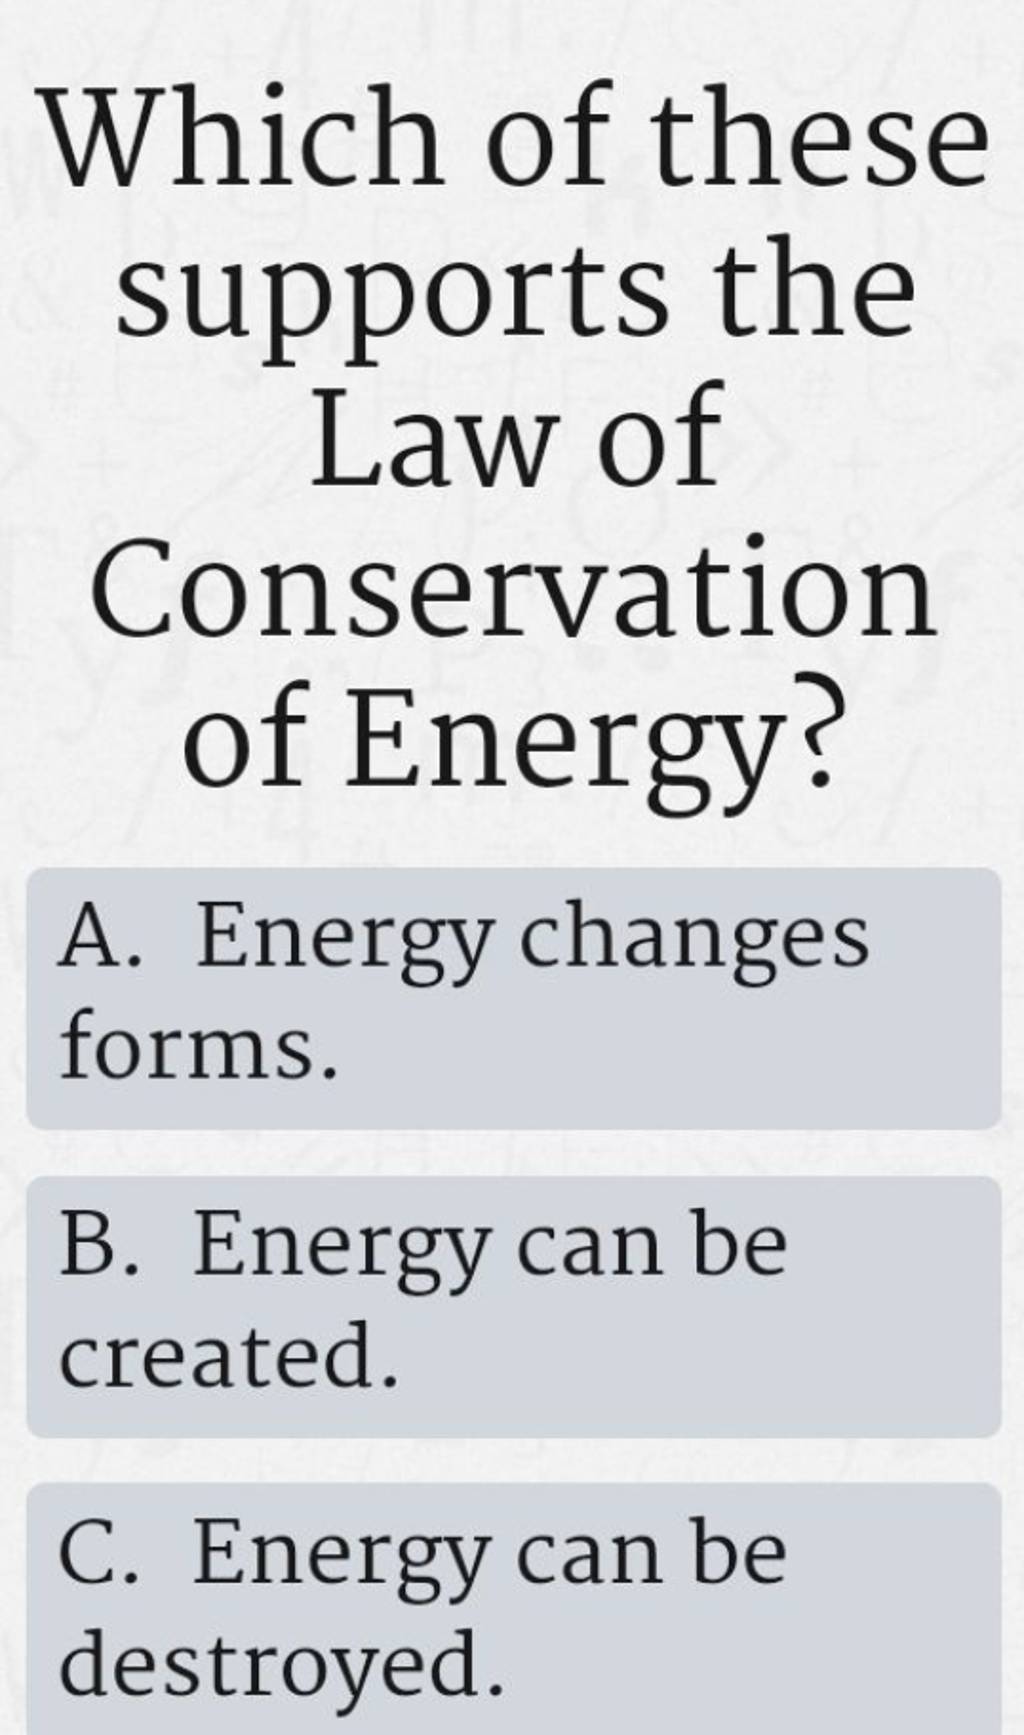 Which of these supports the Law of Conservation of Energy?
A. Energy c